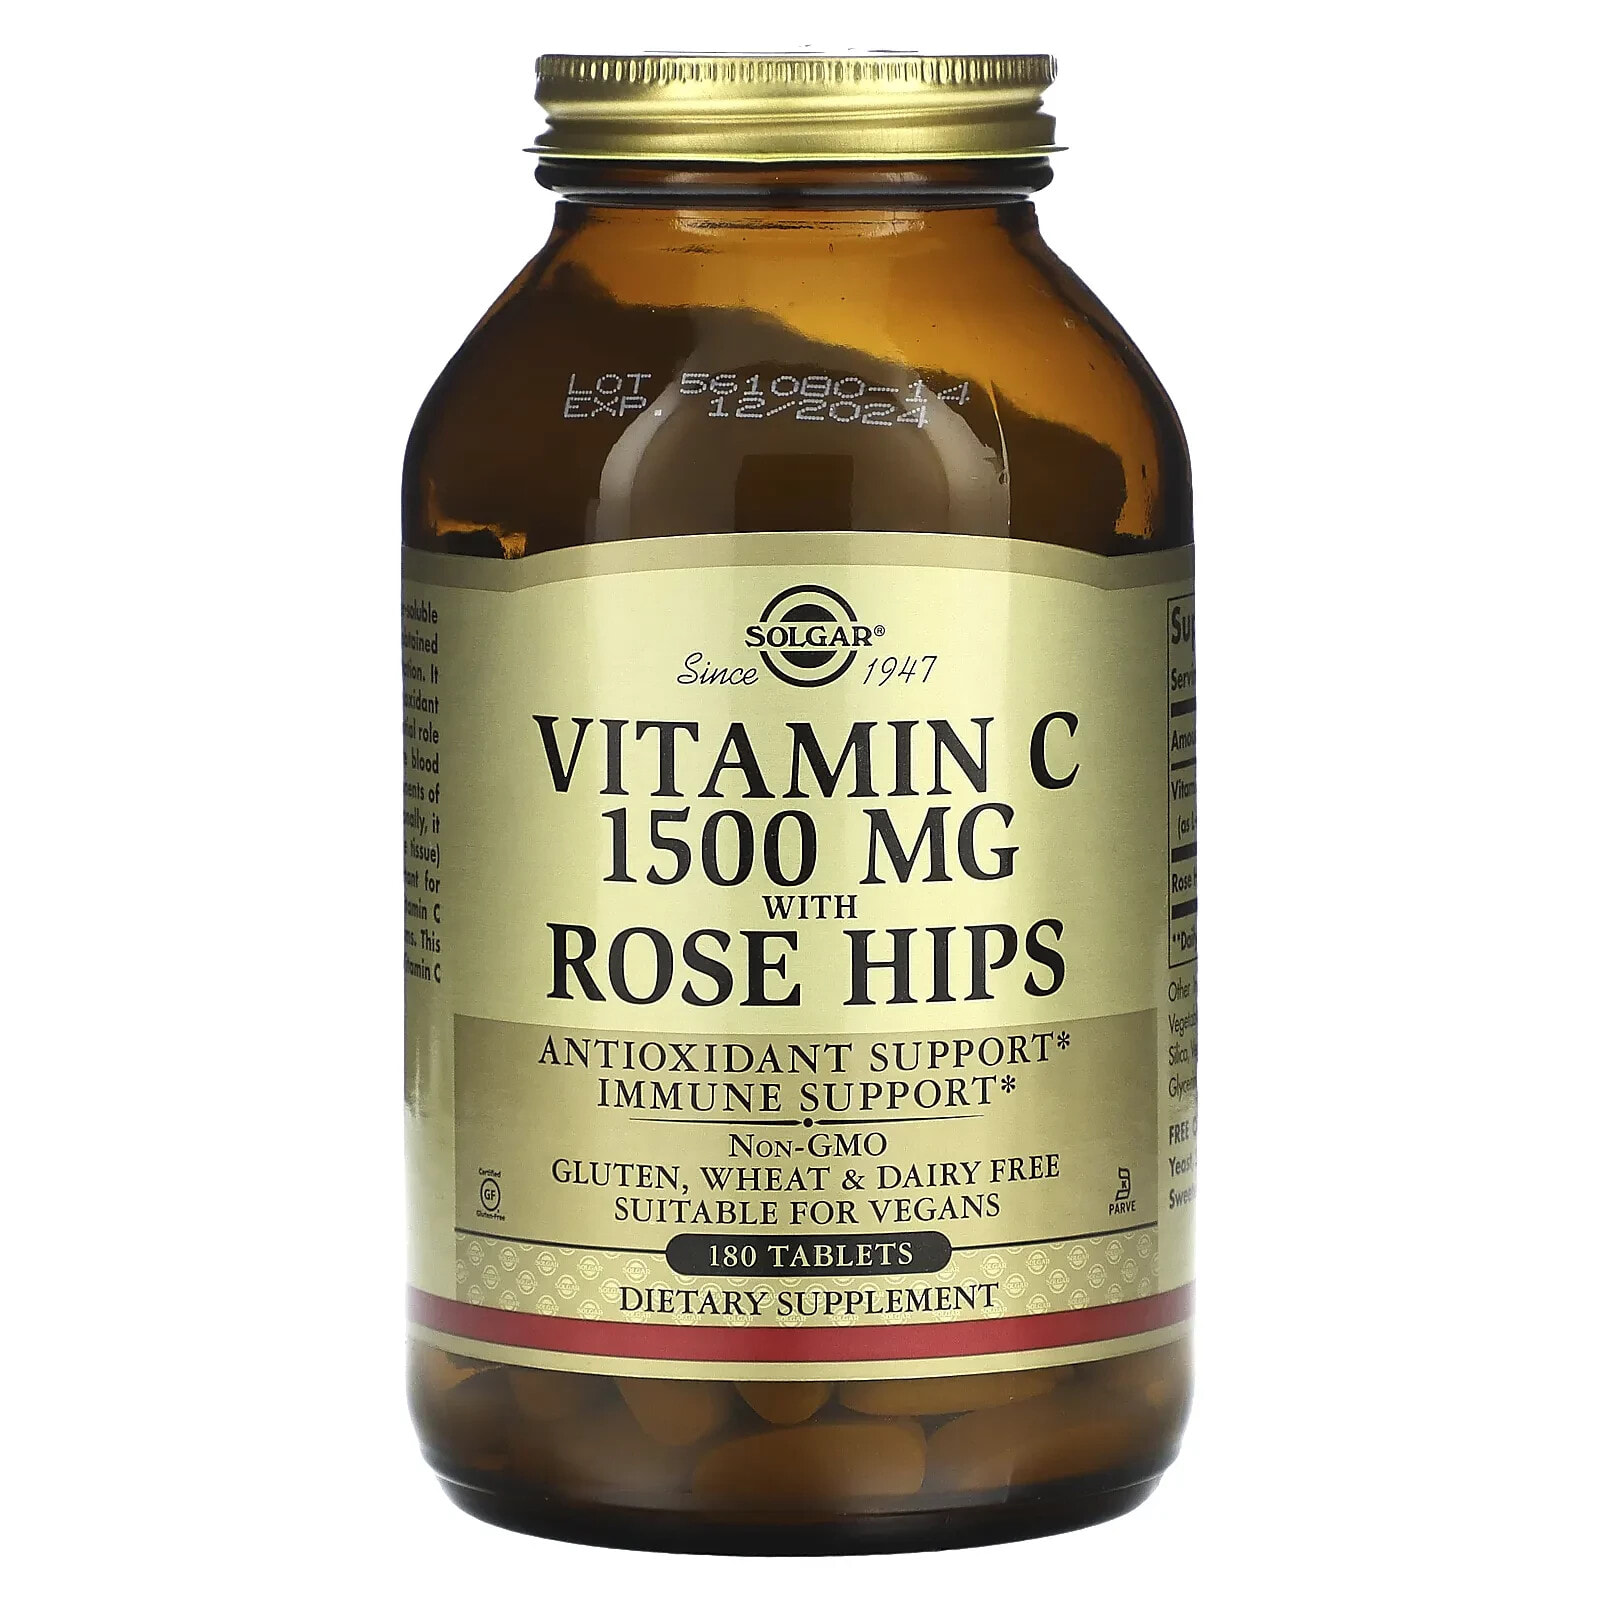 Vitamin C with Rose Hips, 1,000 mg, 250 Tablets